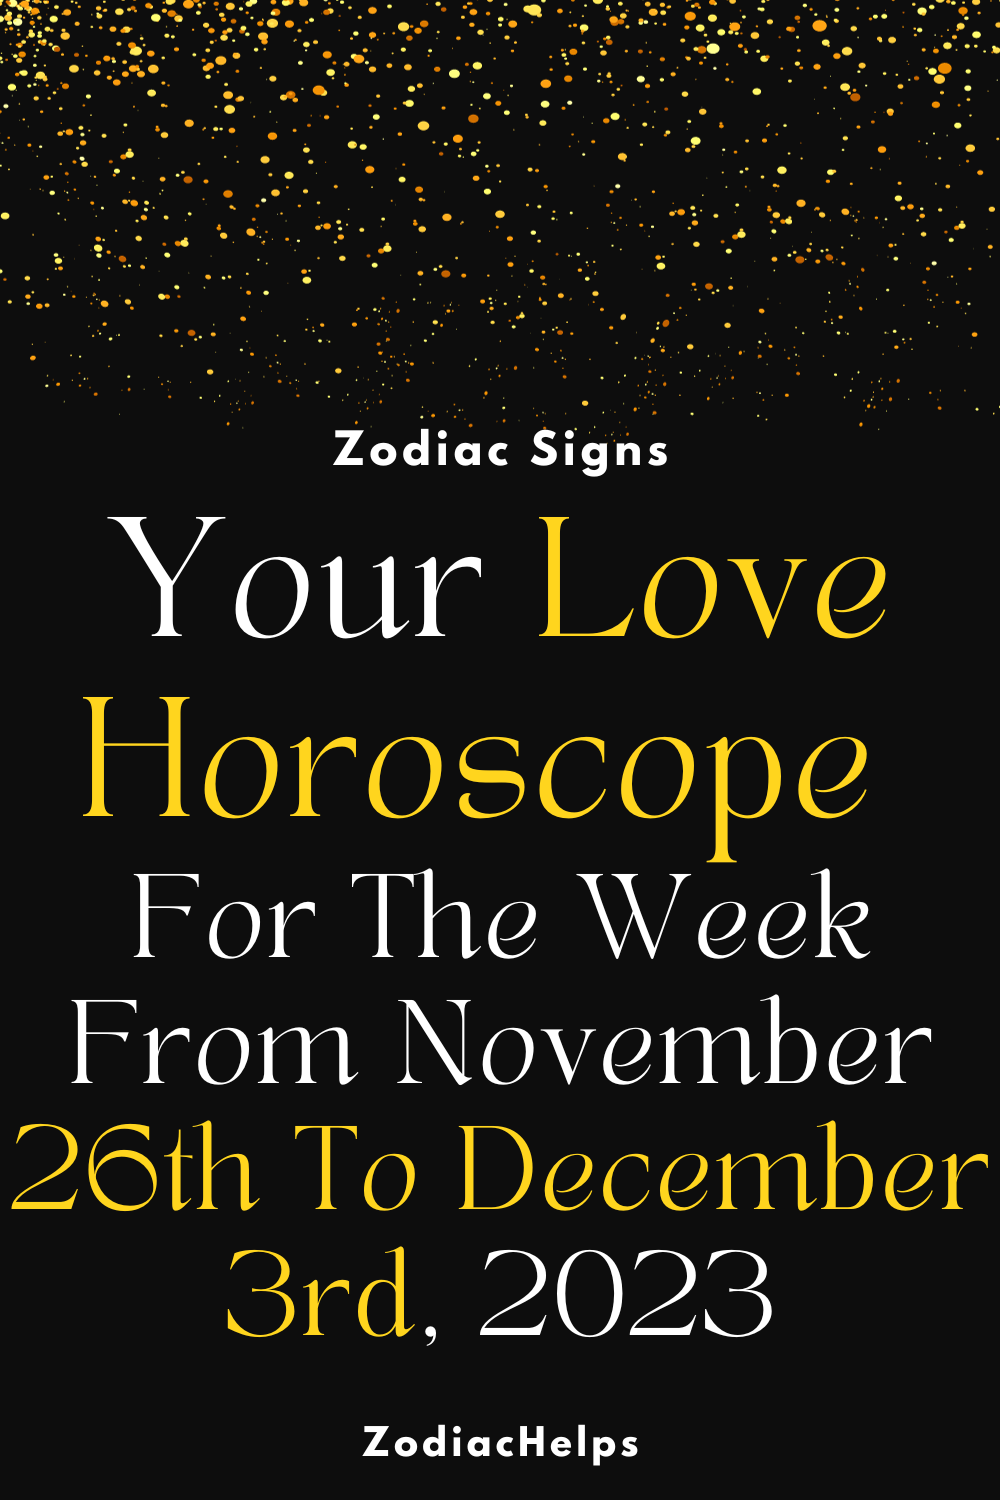 Your Love Horoscope For The Week From November 26th To December 3rd, 2023